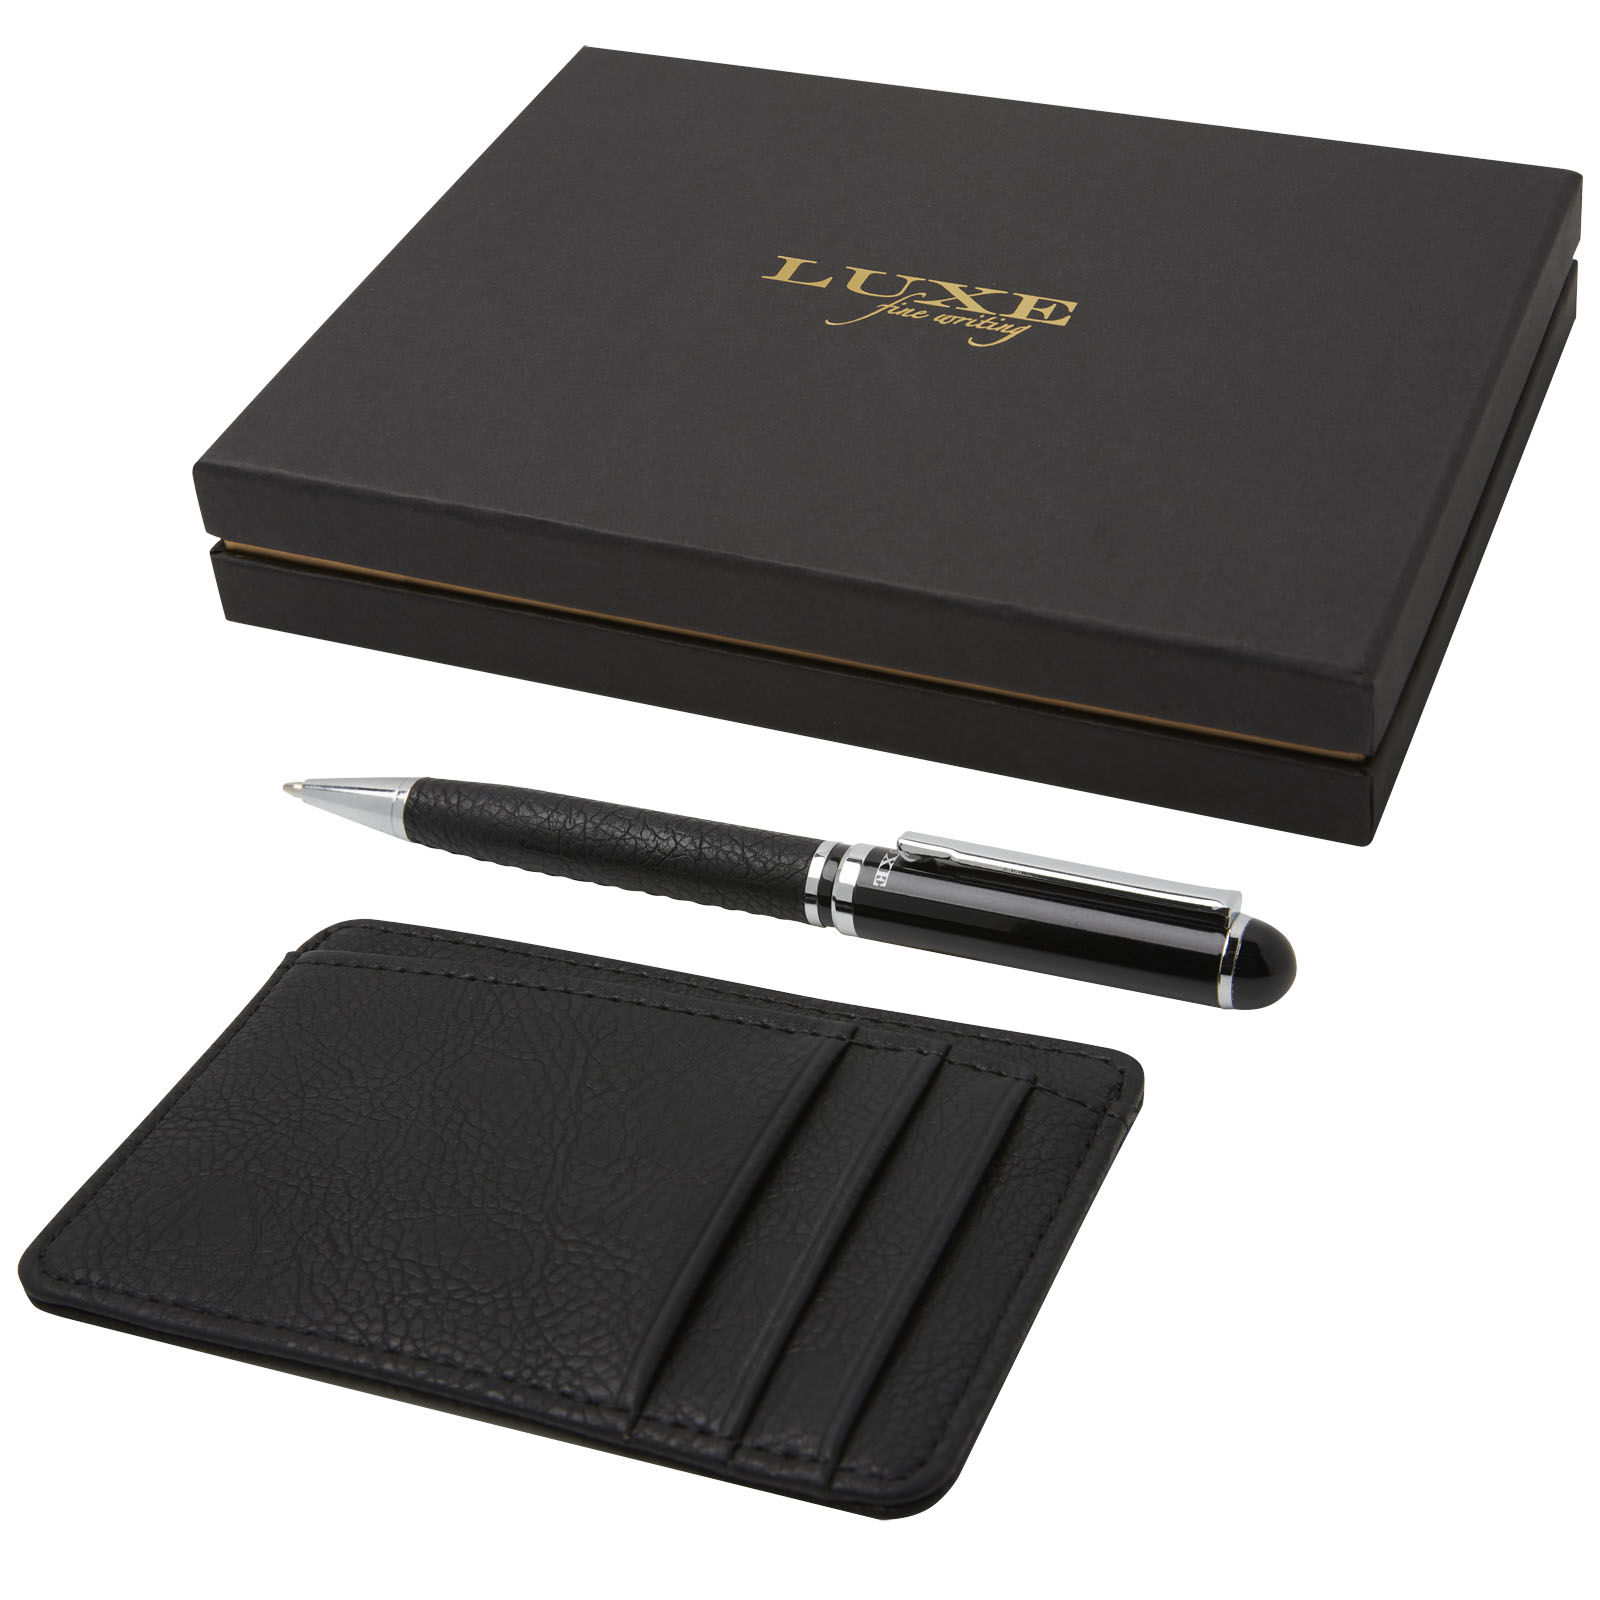 Advertising Gift sets - Encore ballpoint pen and wallet gift set - 0